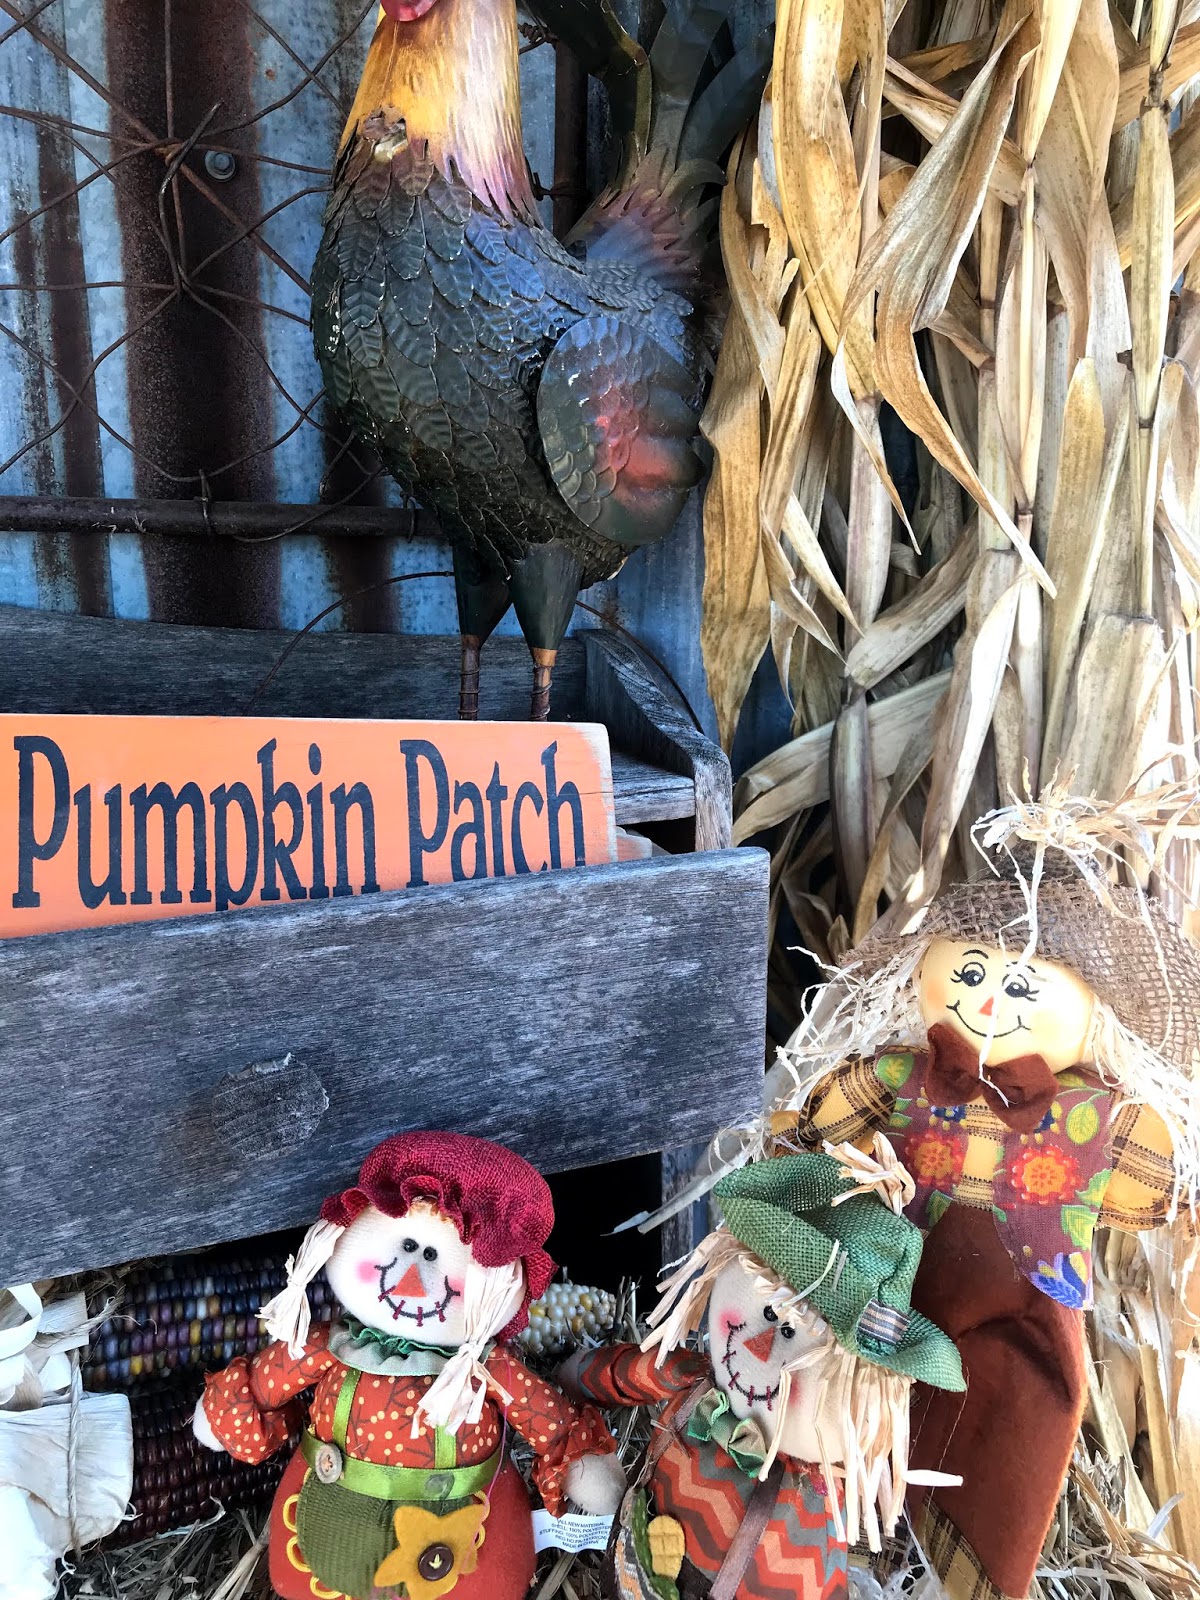 The Cutest Pumpkin Baskets, Posing With The Scare Crows And Getting Lost In The CRAZIEST Maze!